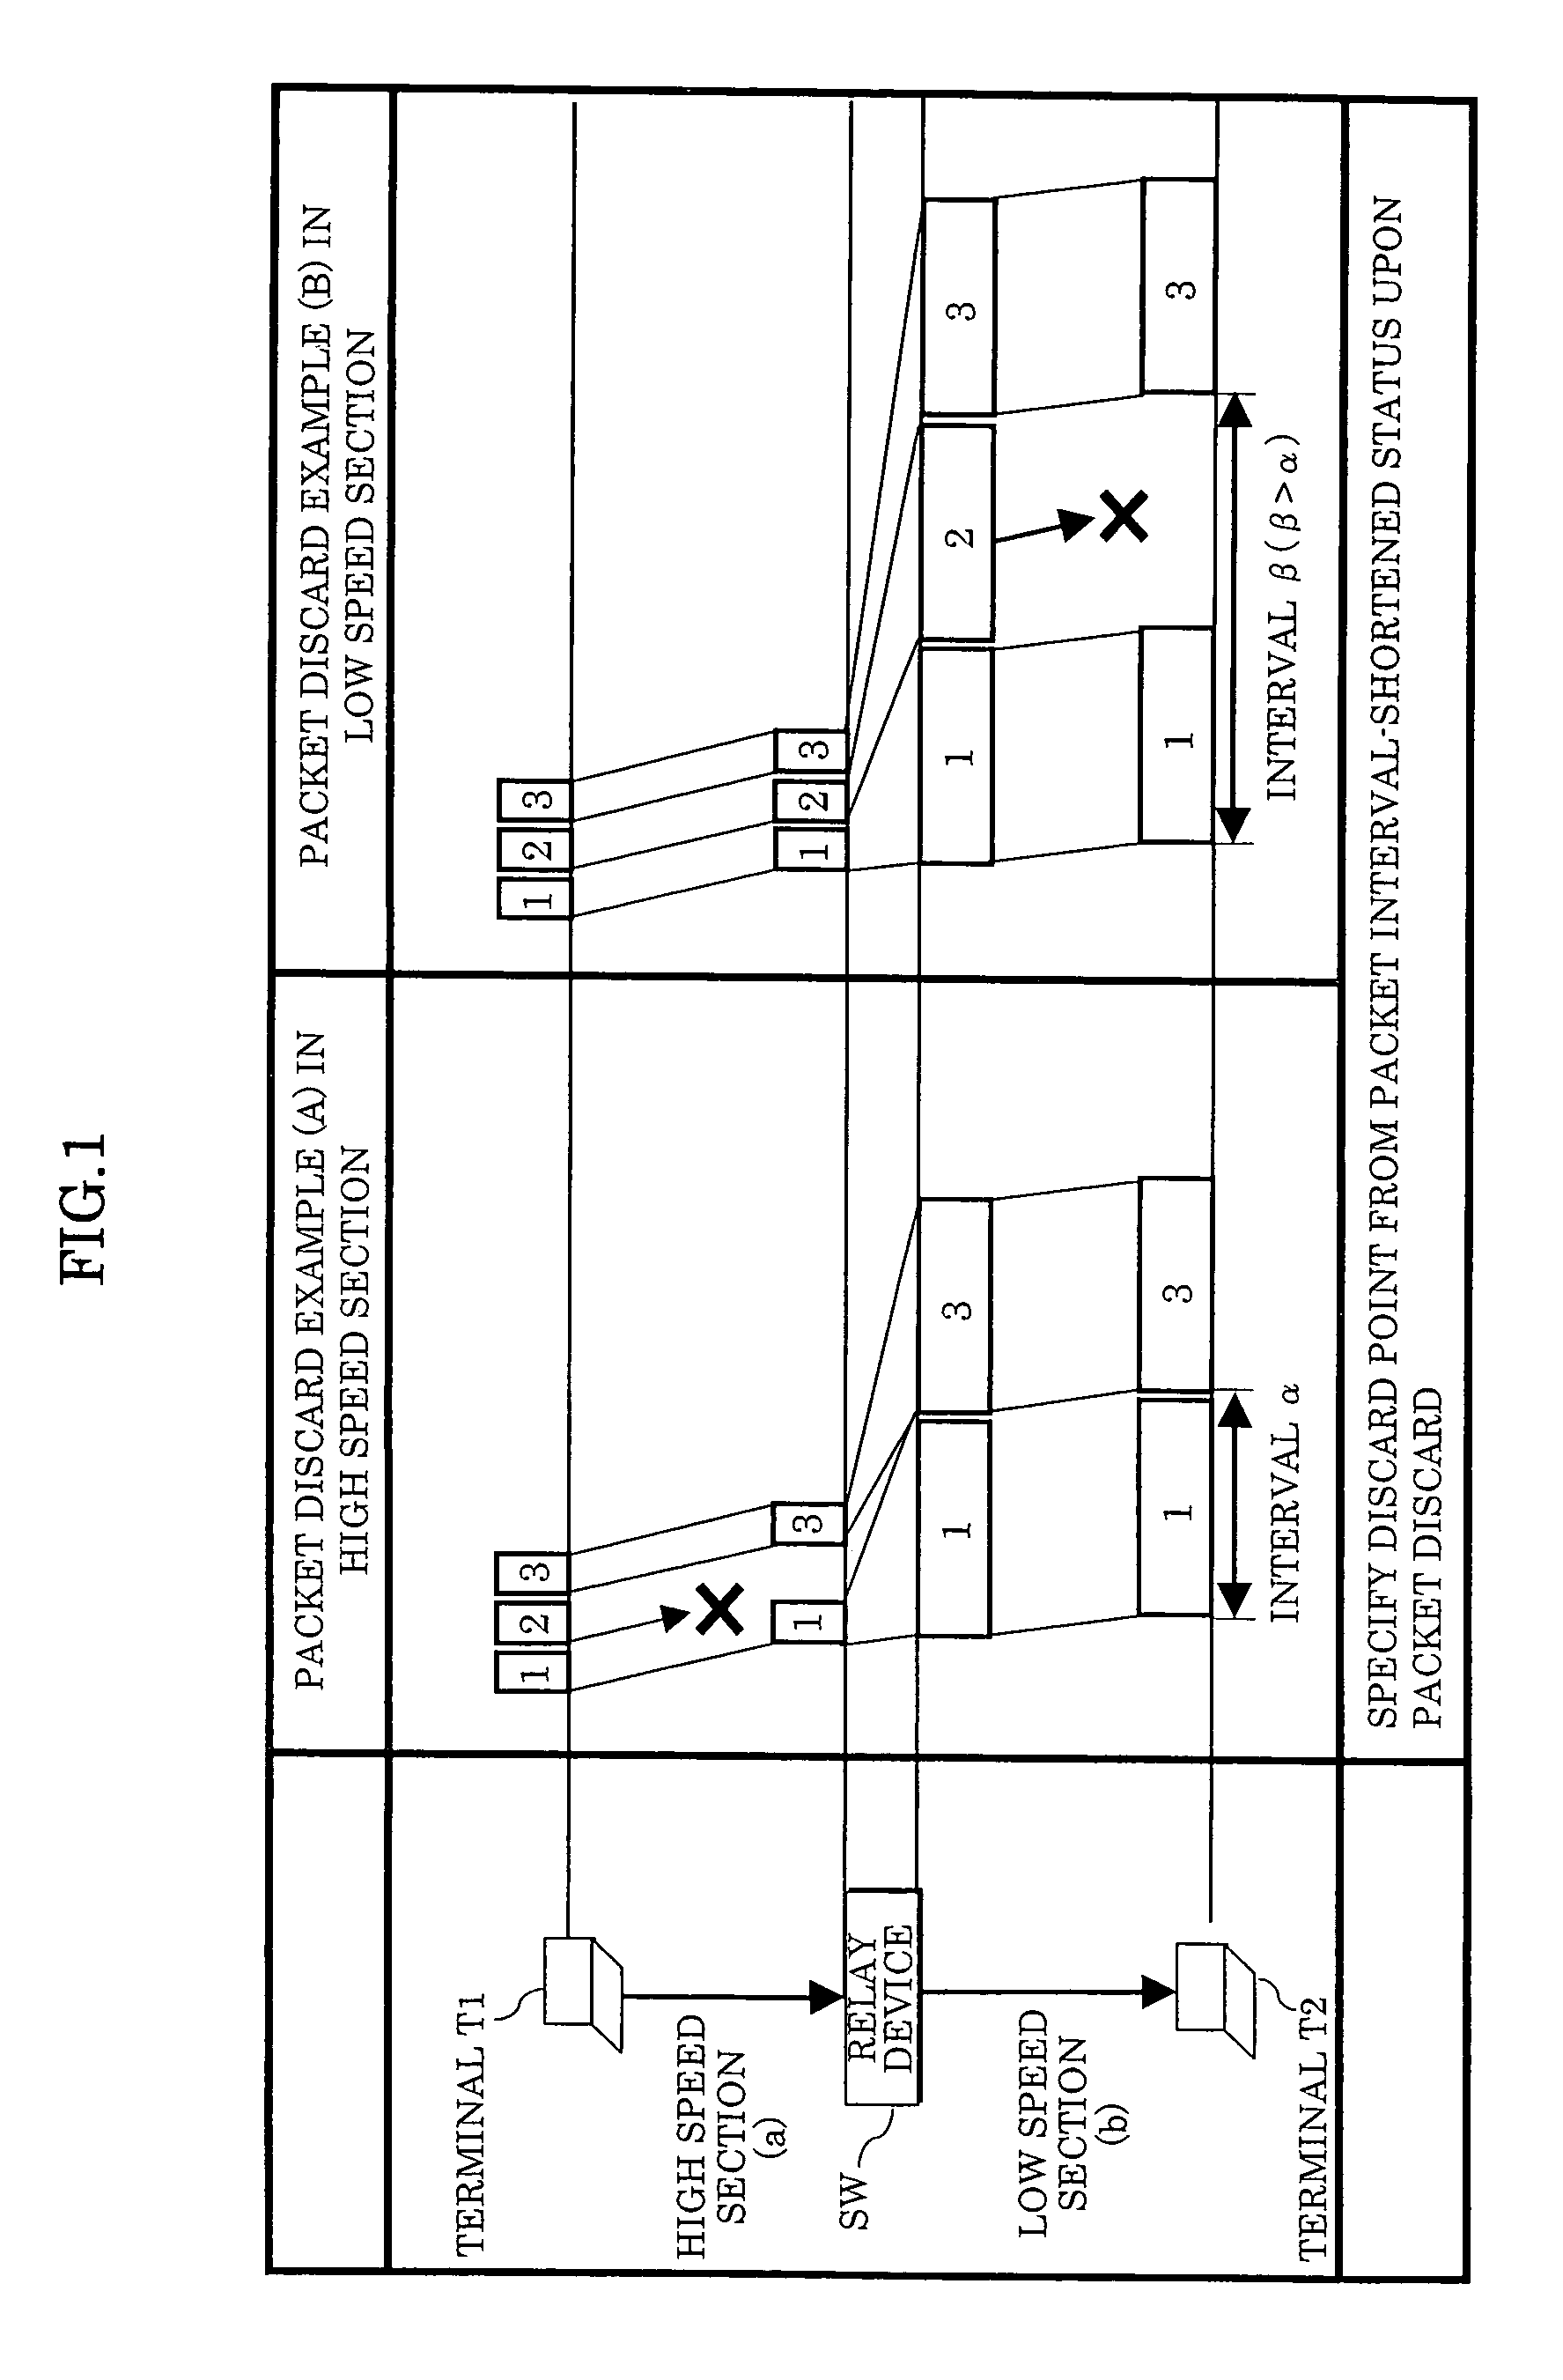 Packet discard point probing method and device